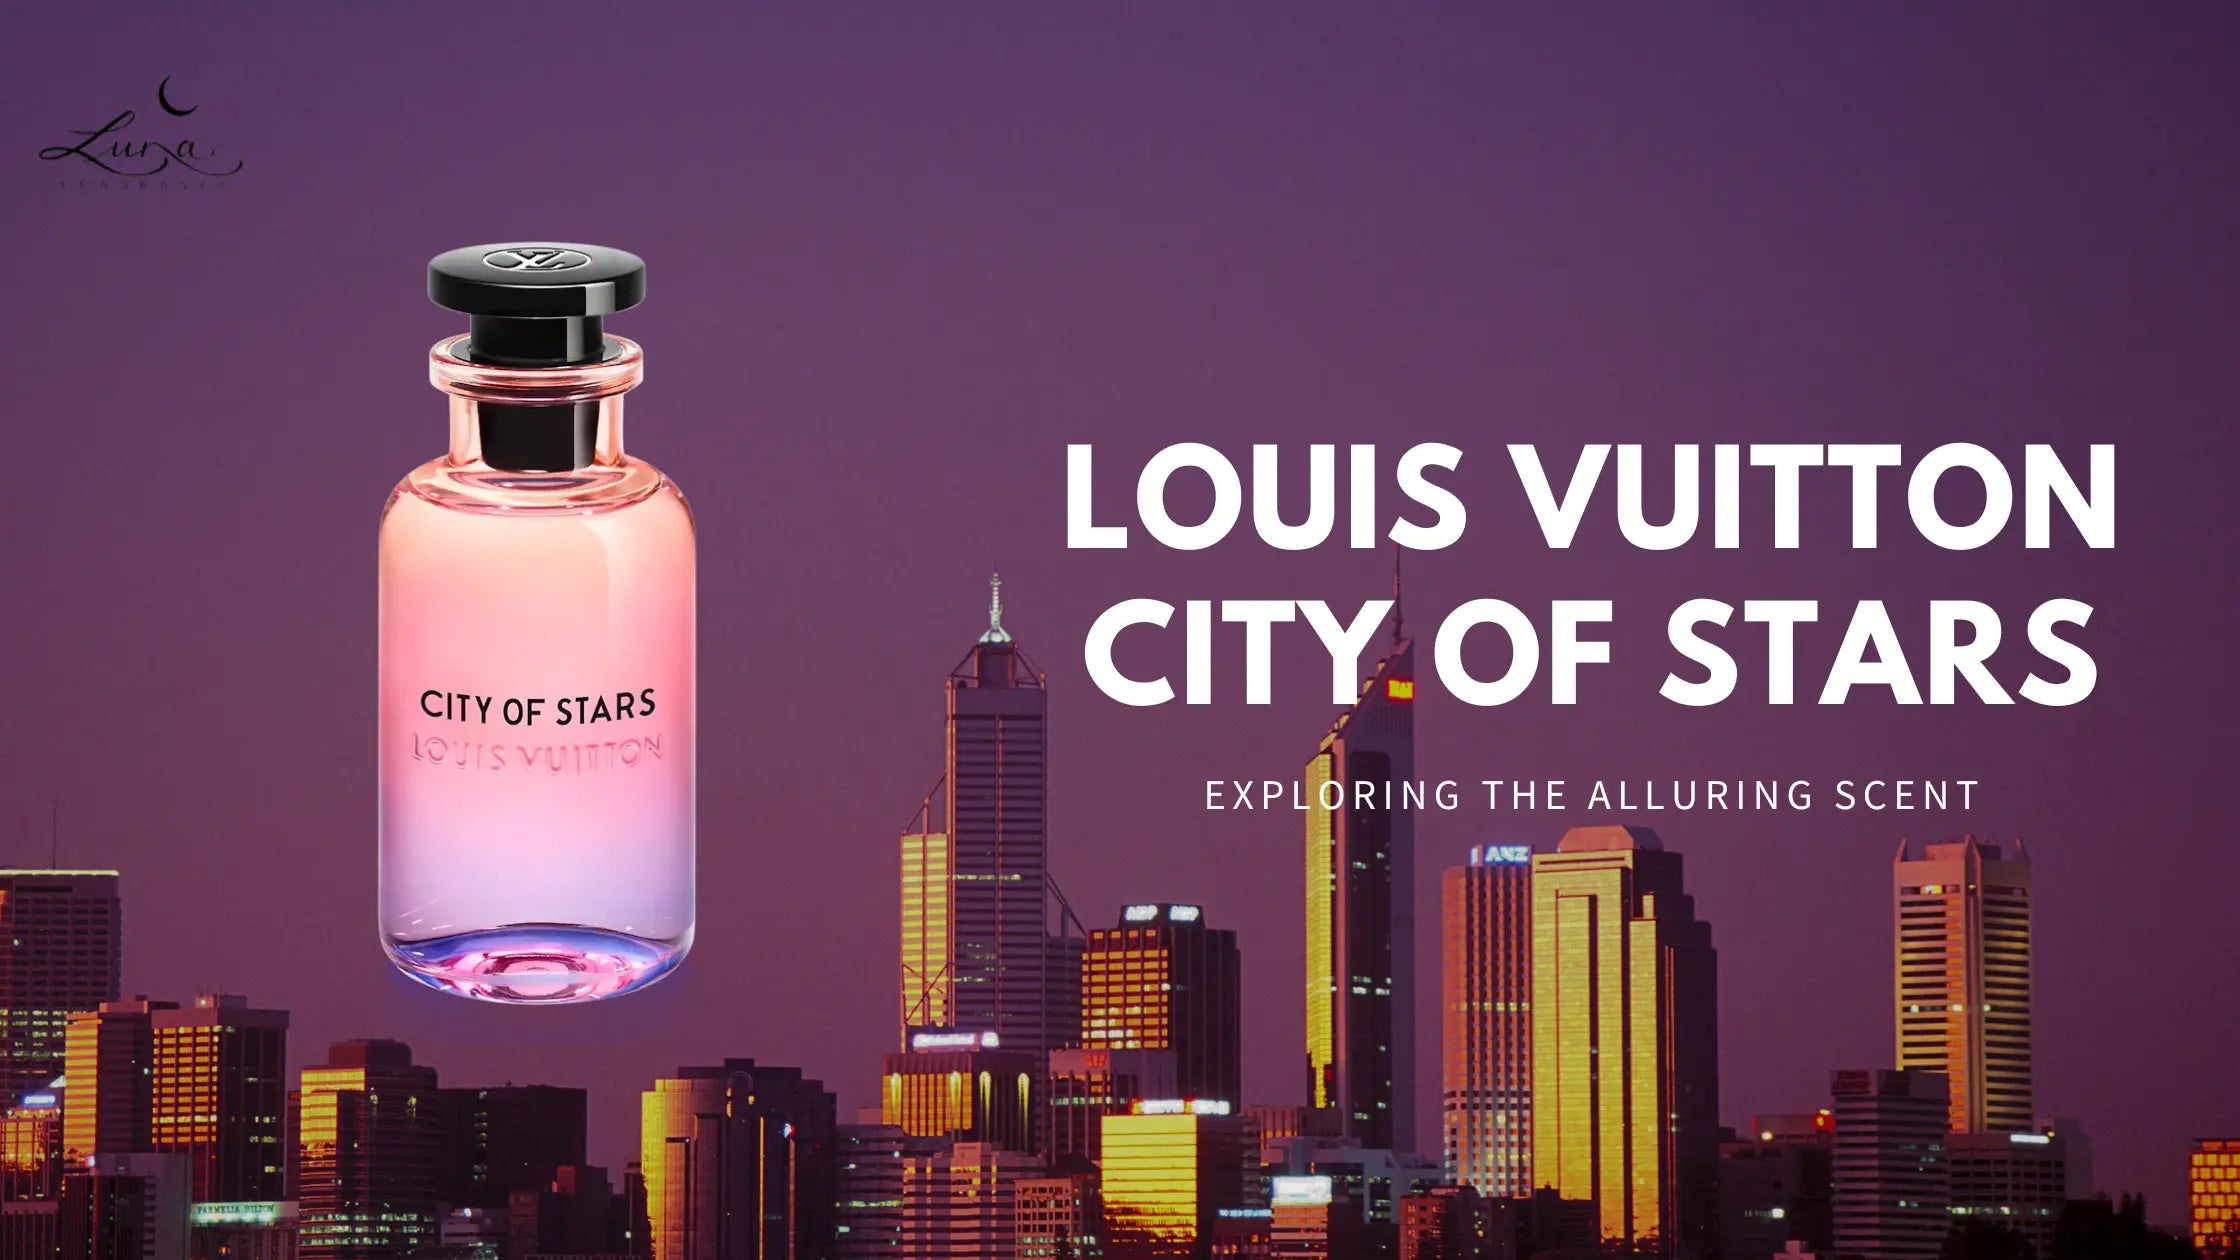 Louis Vuitton City of Stars: Exploring the Alluring Scent